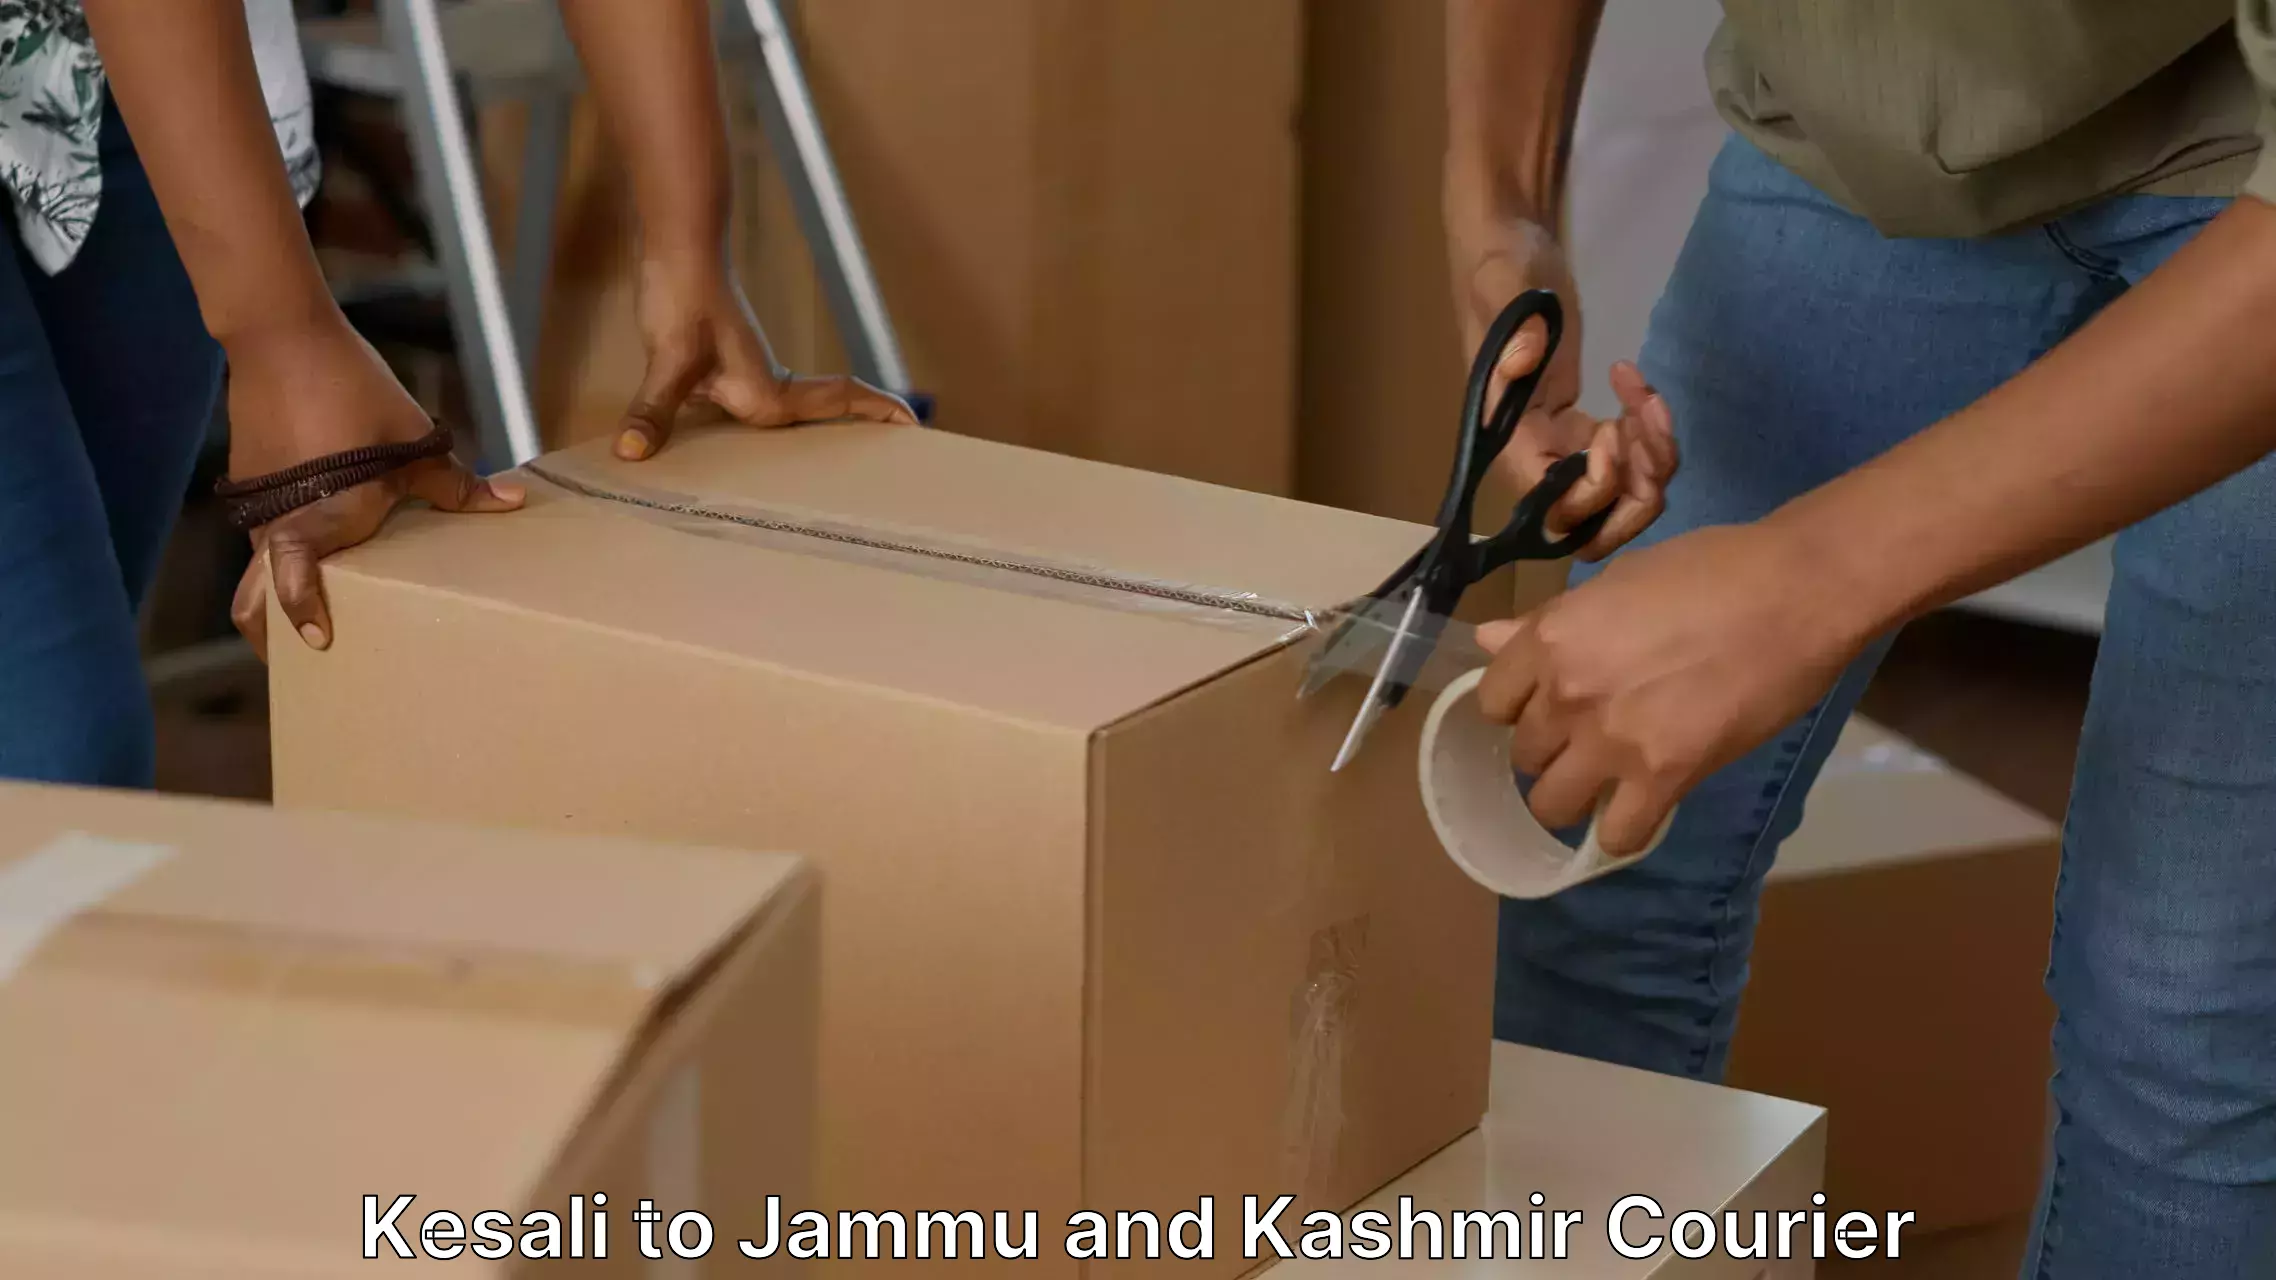 Professional packing services Kesali to Jammu and Kashmir